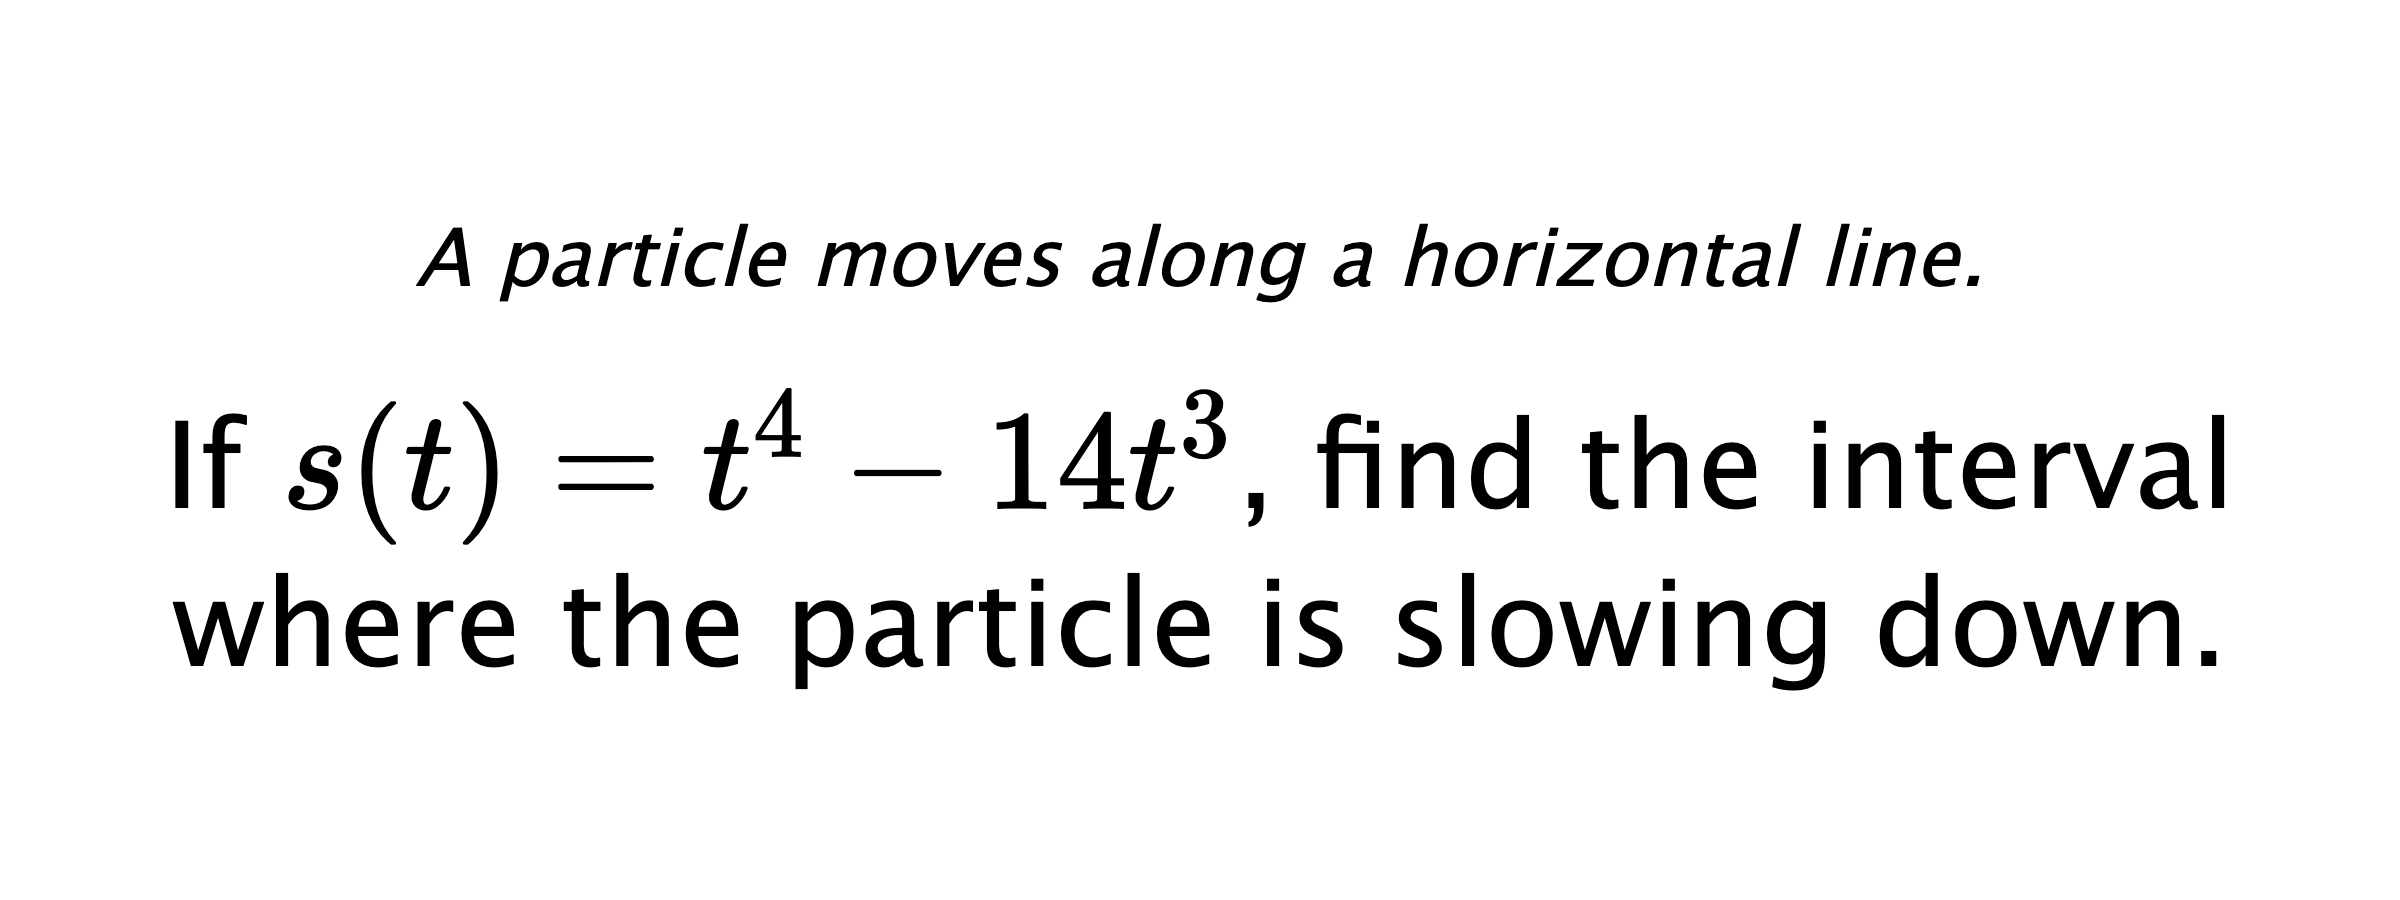 A particle moves along a horizontal line. If $ s(t)=t^4-14t^3 $, find the interval where the particle is slowing down.